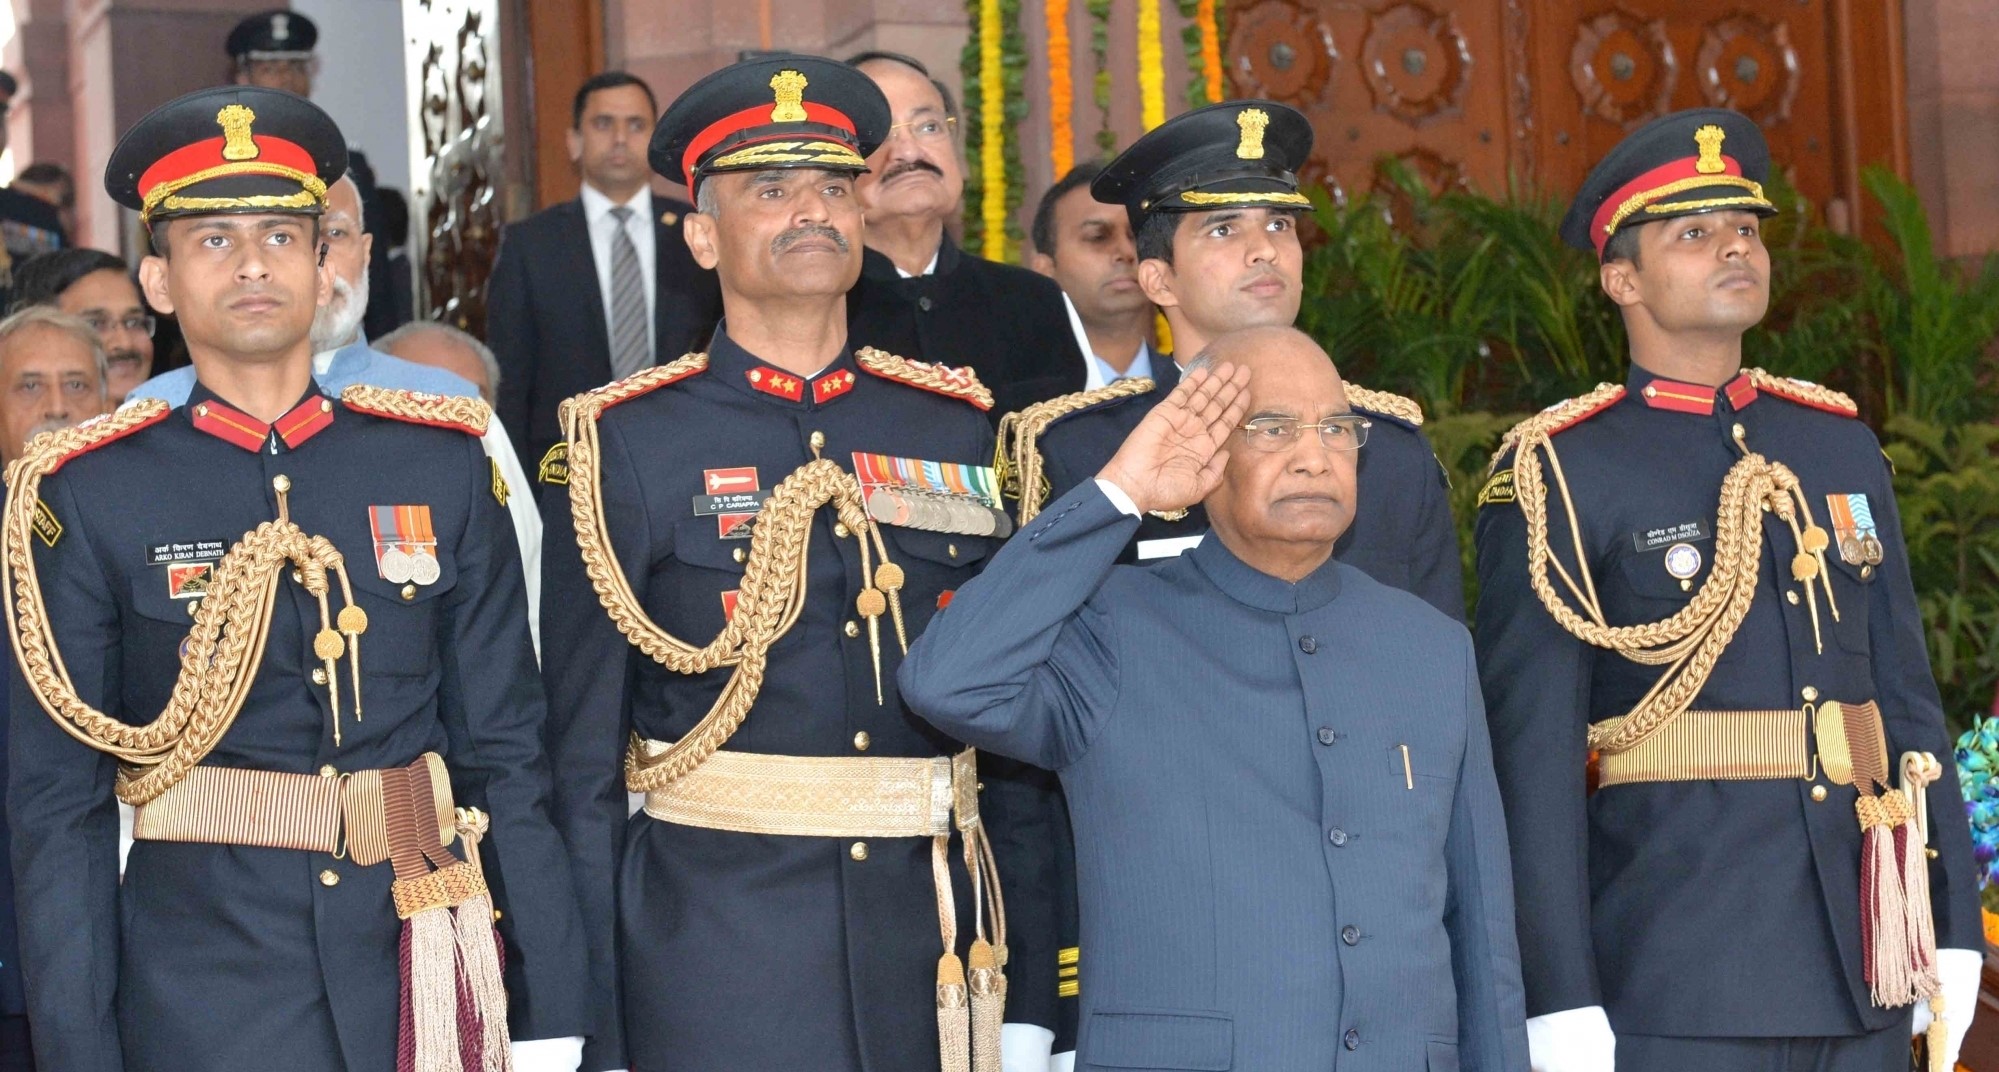 RBI's enhanced role to deter malpractices, add credibility to financial system: President Kovind